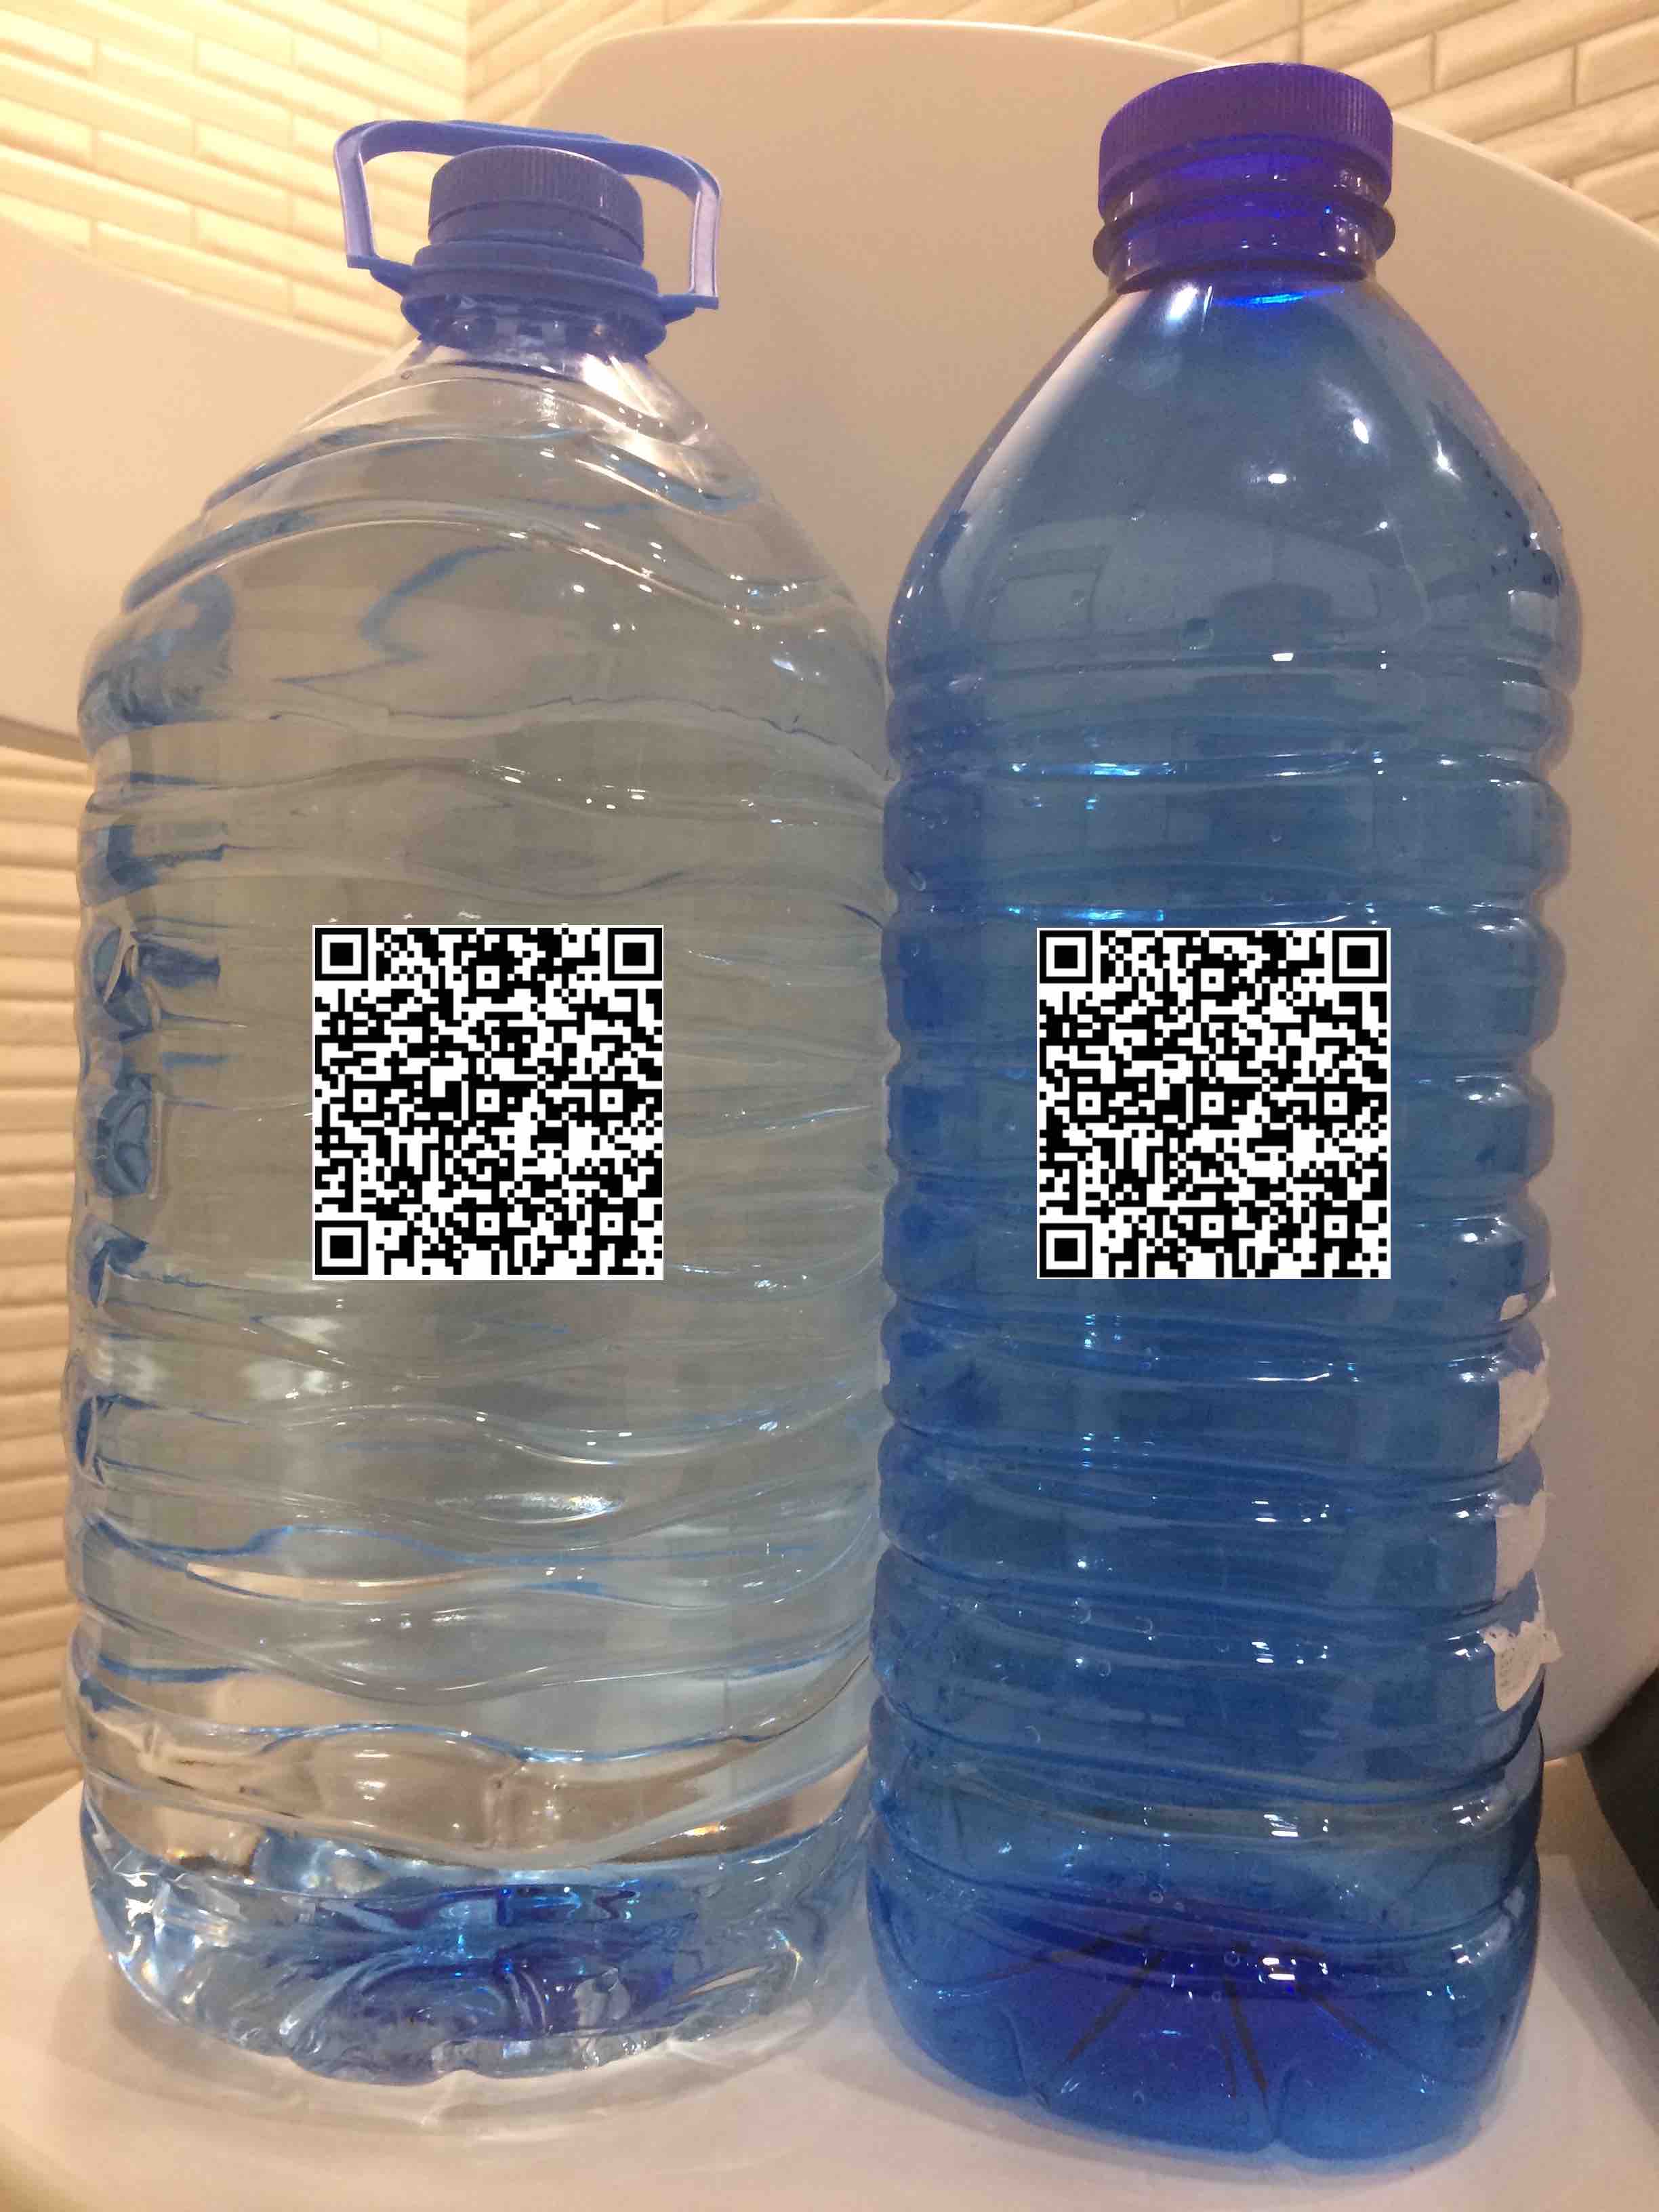 bottles with qr codes